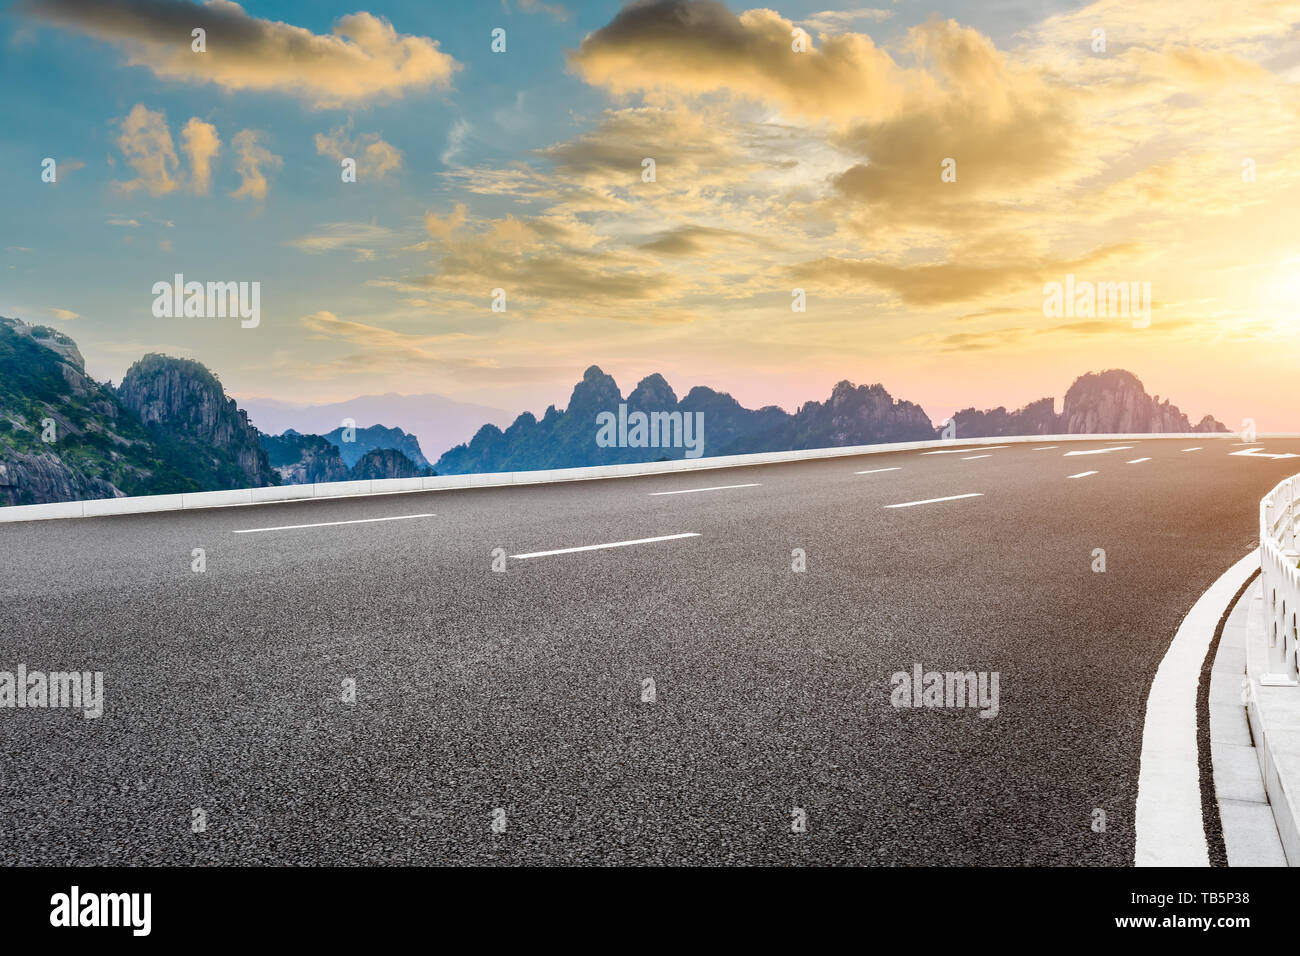 Asphalt highway road and beautiful huangshan mountains nature landscape at sunrise Stock Photo